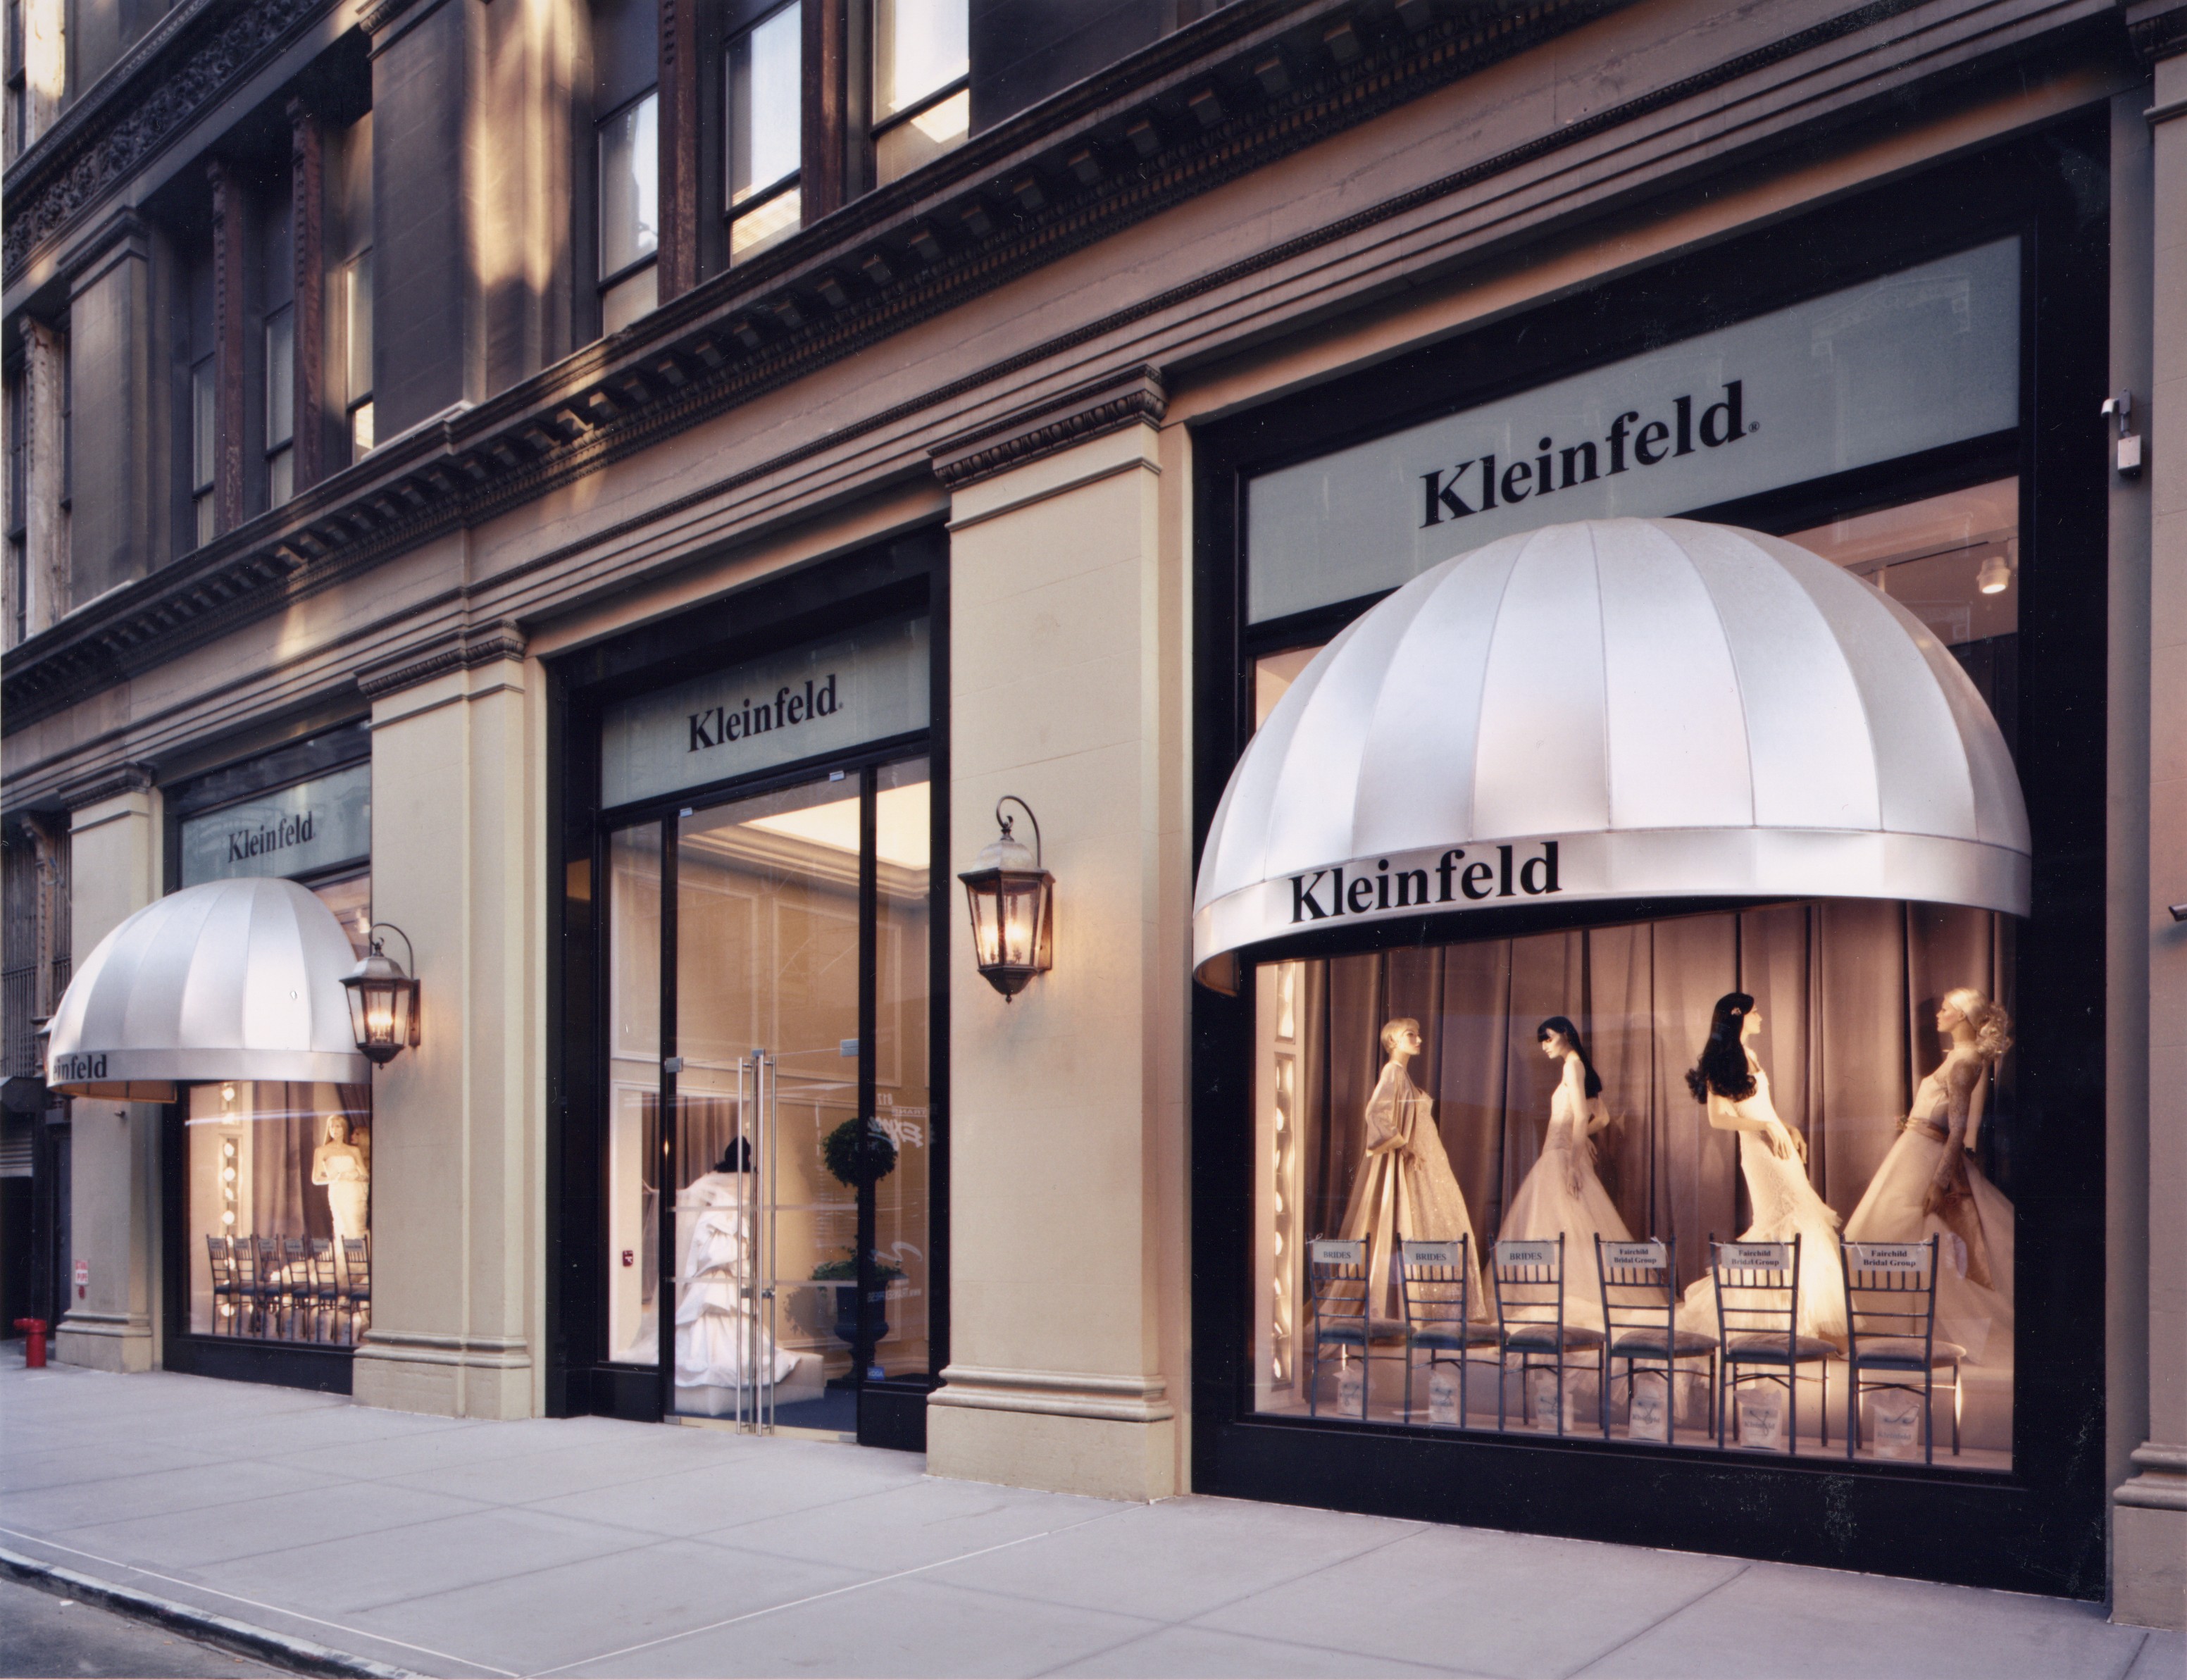 How to Visit Kleinfeld As a Fan